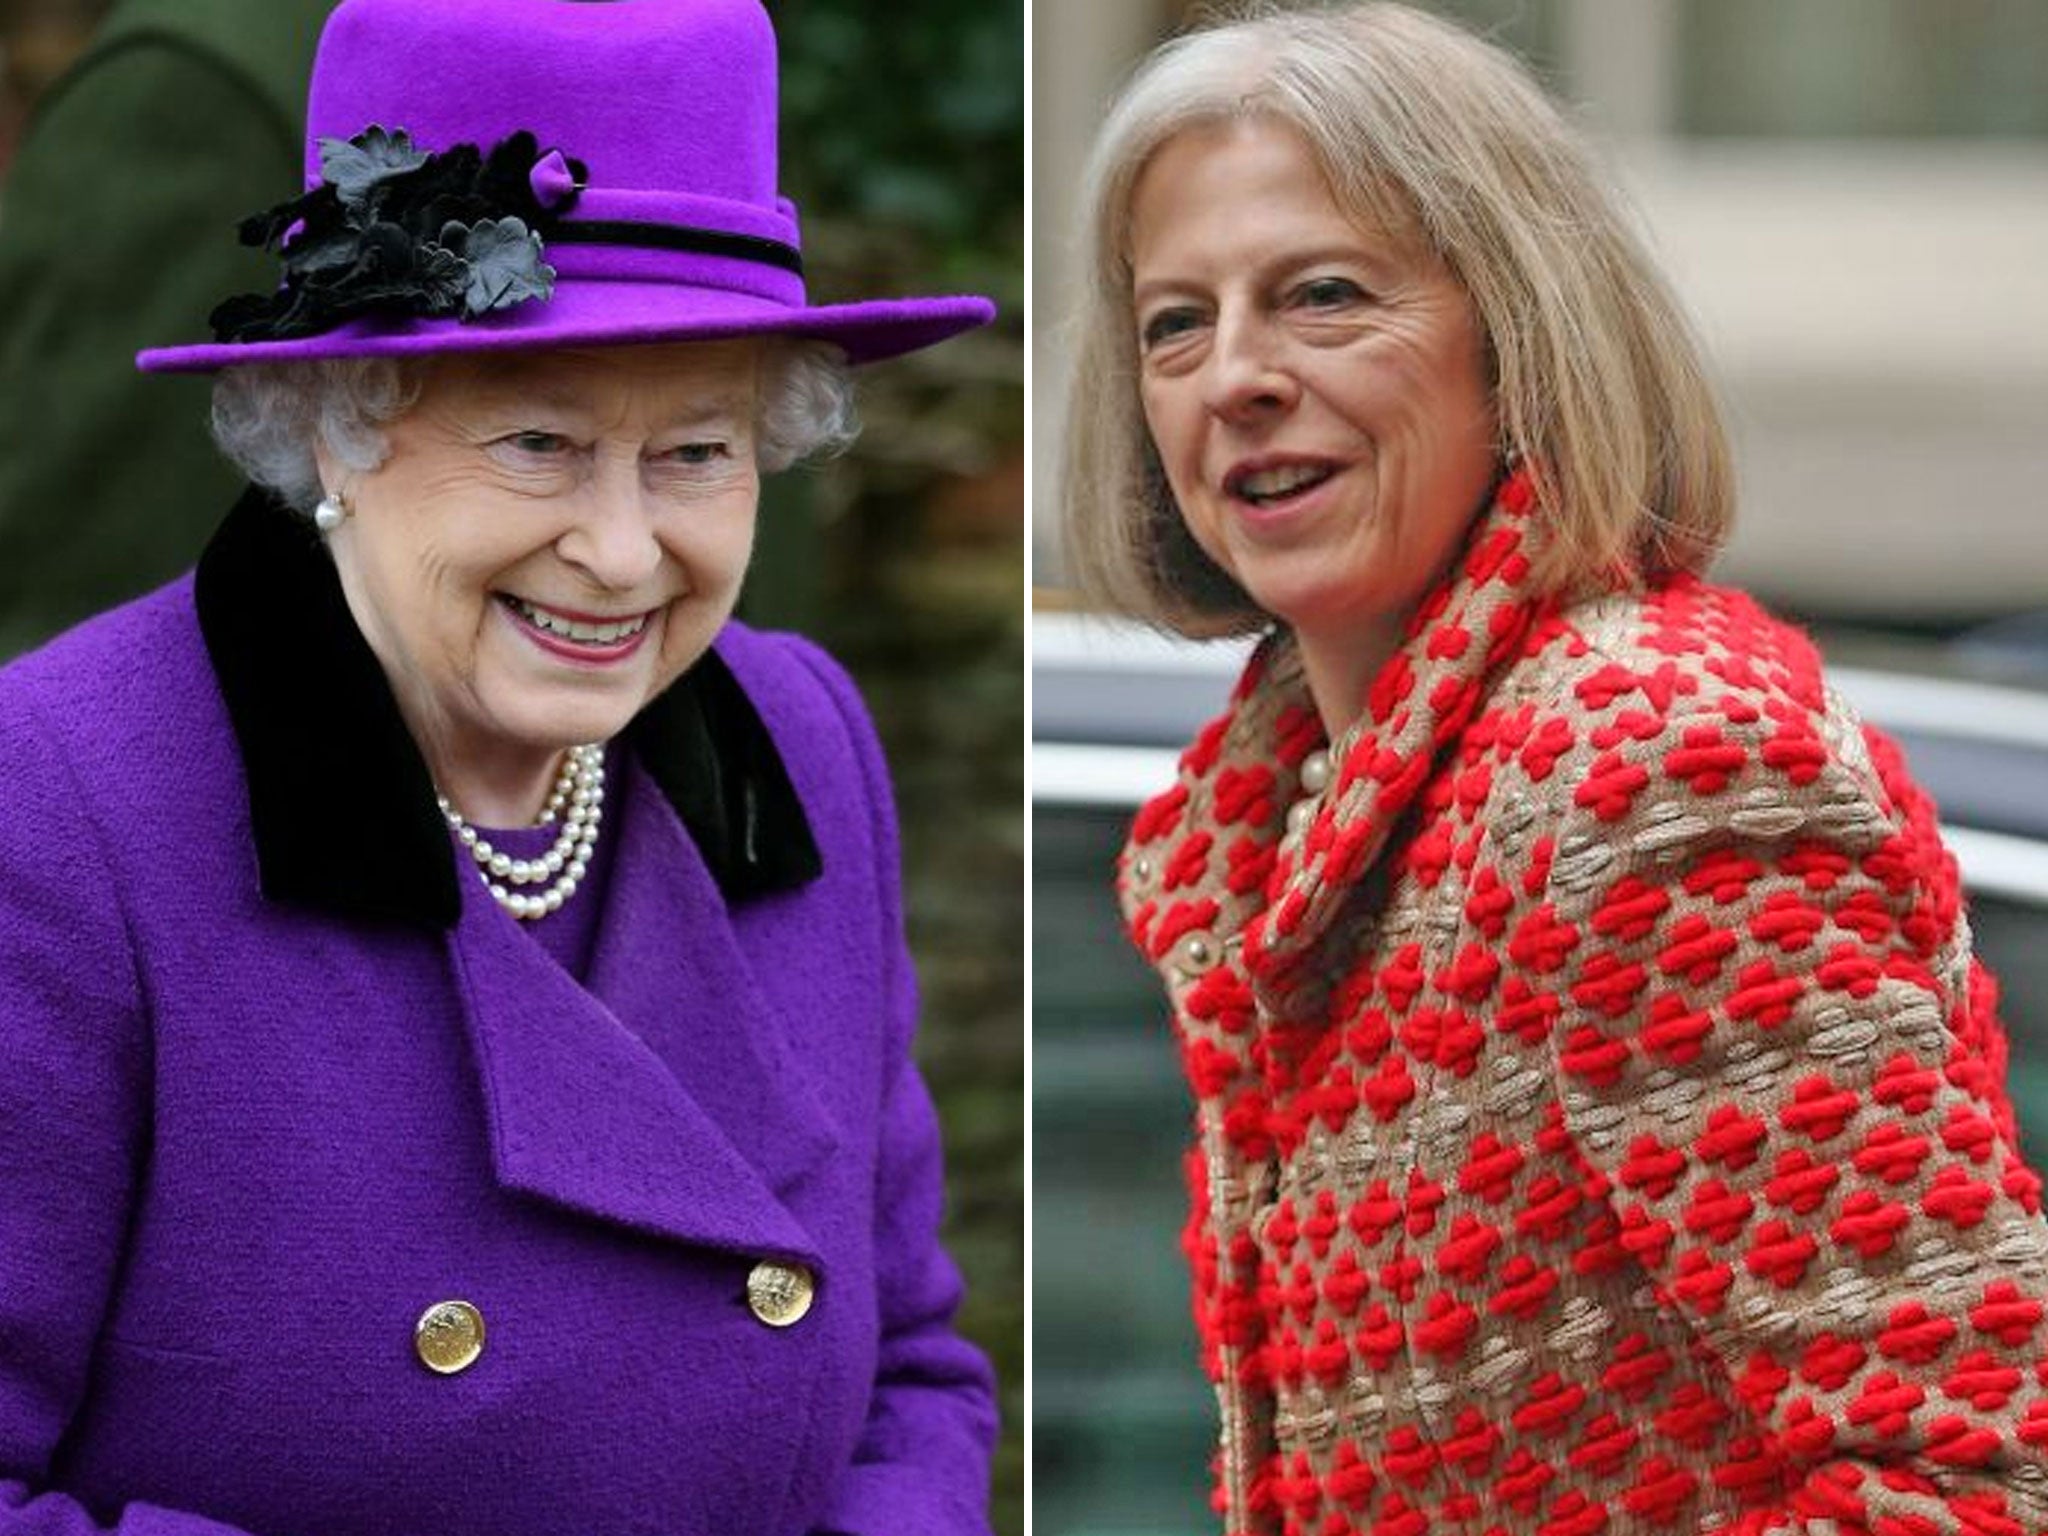 The Queen has been voted the most powerful woman in Britain and followed by Home Secretary Theresa May in the list